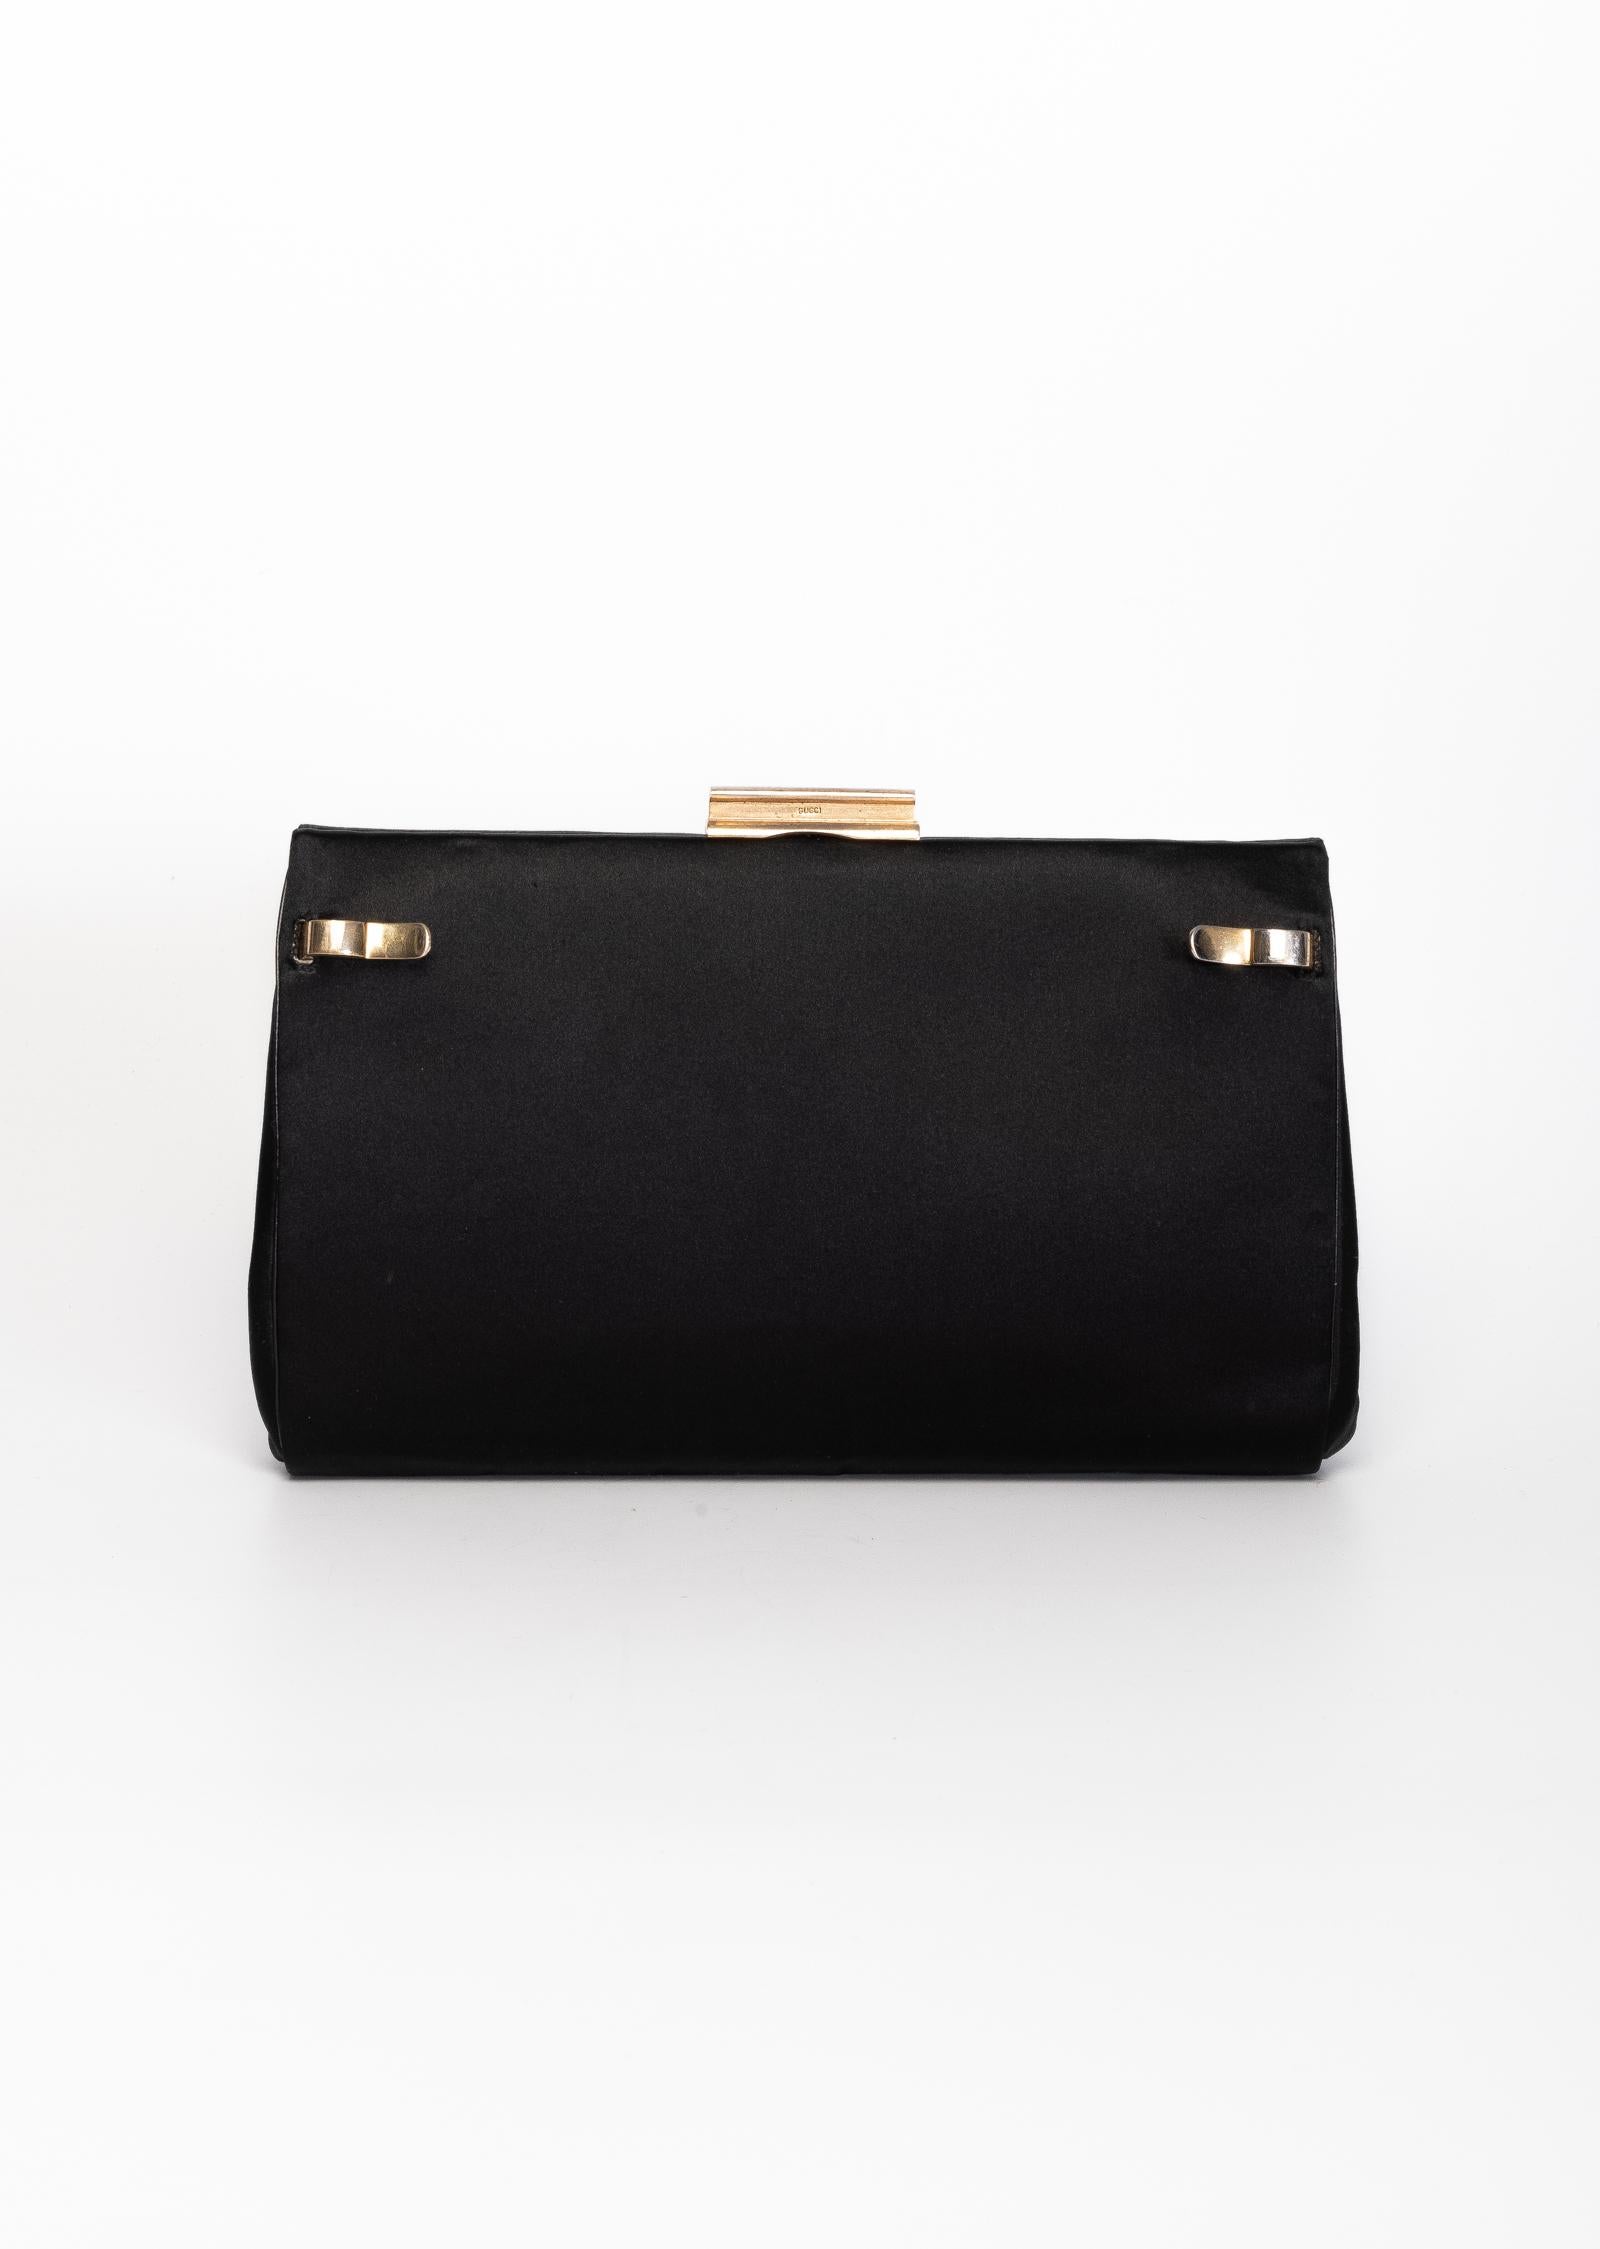 This 1970's Gucci 2N1 bag is convertible from a day shoulder bag to an evening clutch. For clasps open to remove the leather exterior to reveal an evening satin clutch. Featuring gold tone hardware, latch closure, silk linking & 2 slip pockets & a